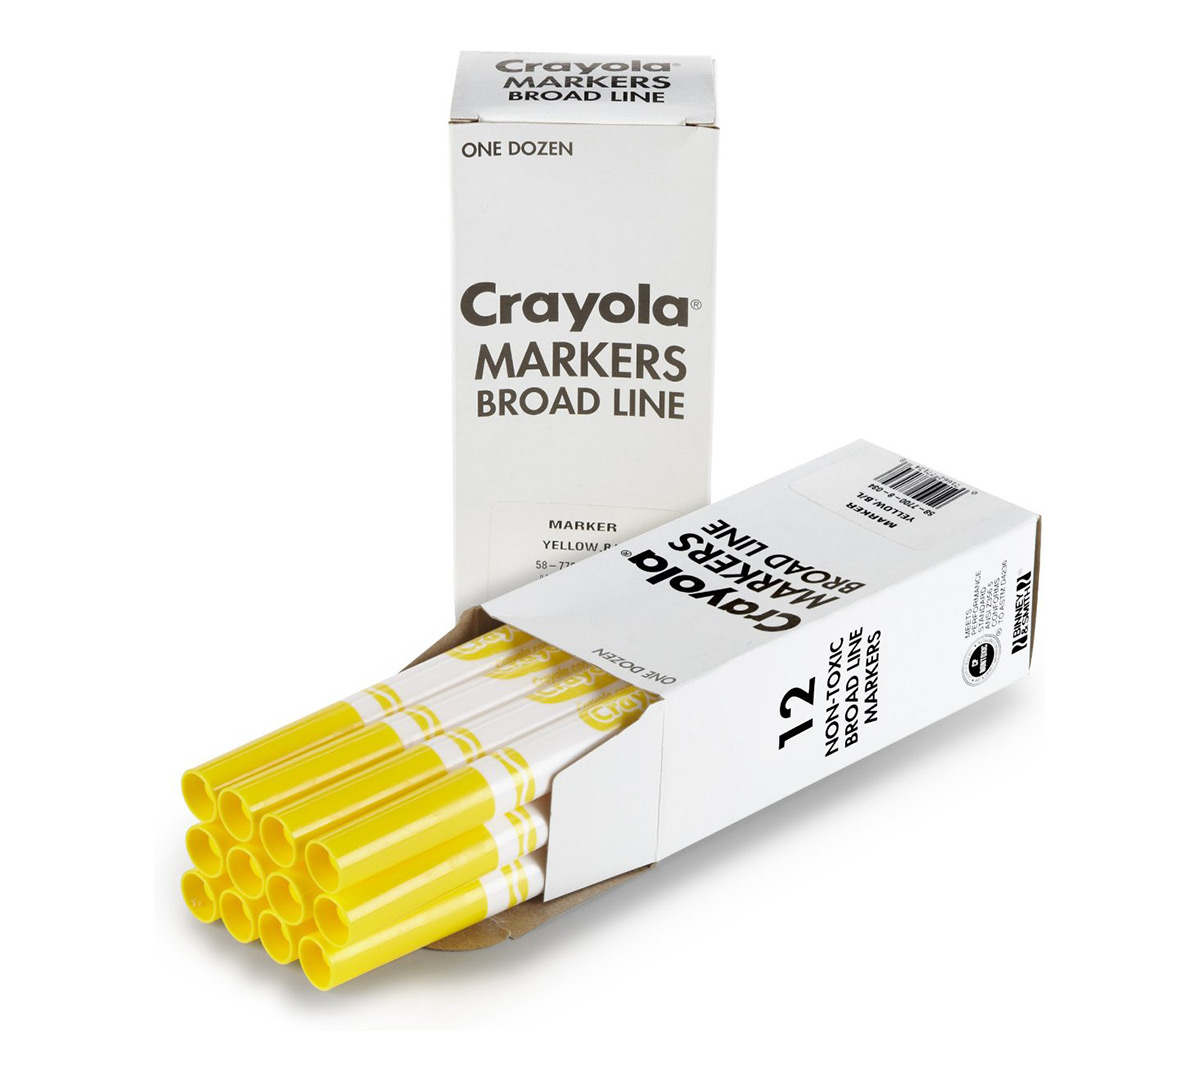  Crayola Broad Line Markers Bulk, 12 Marker Packs with